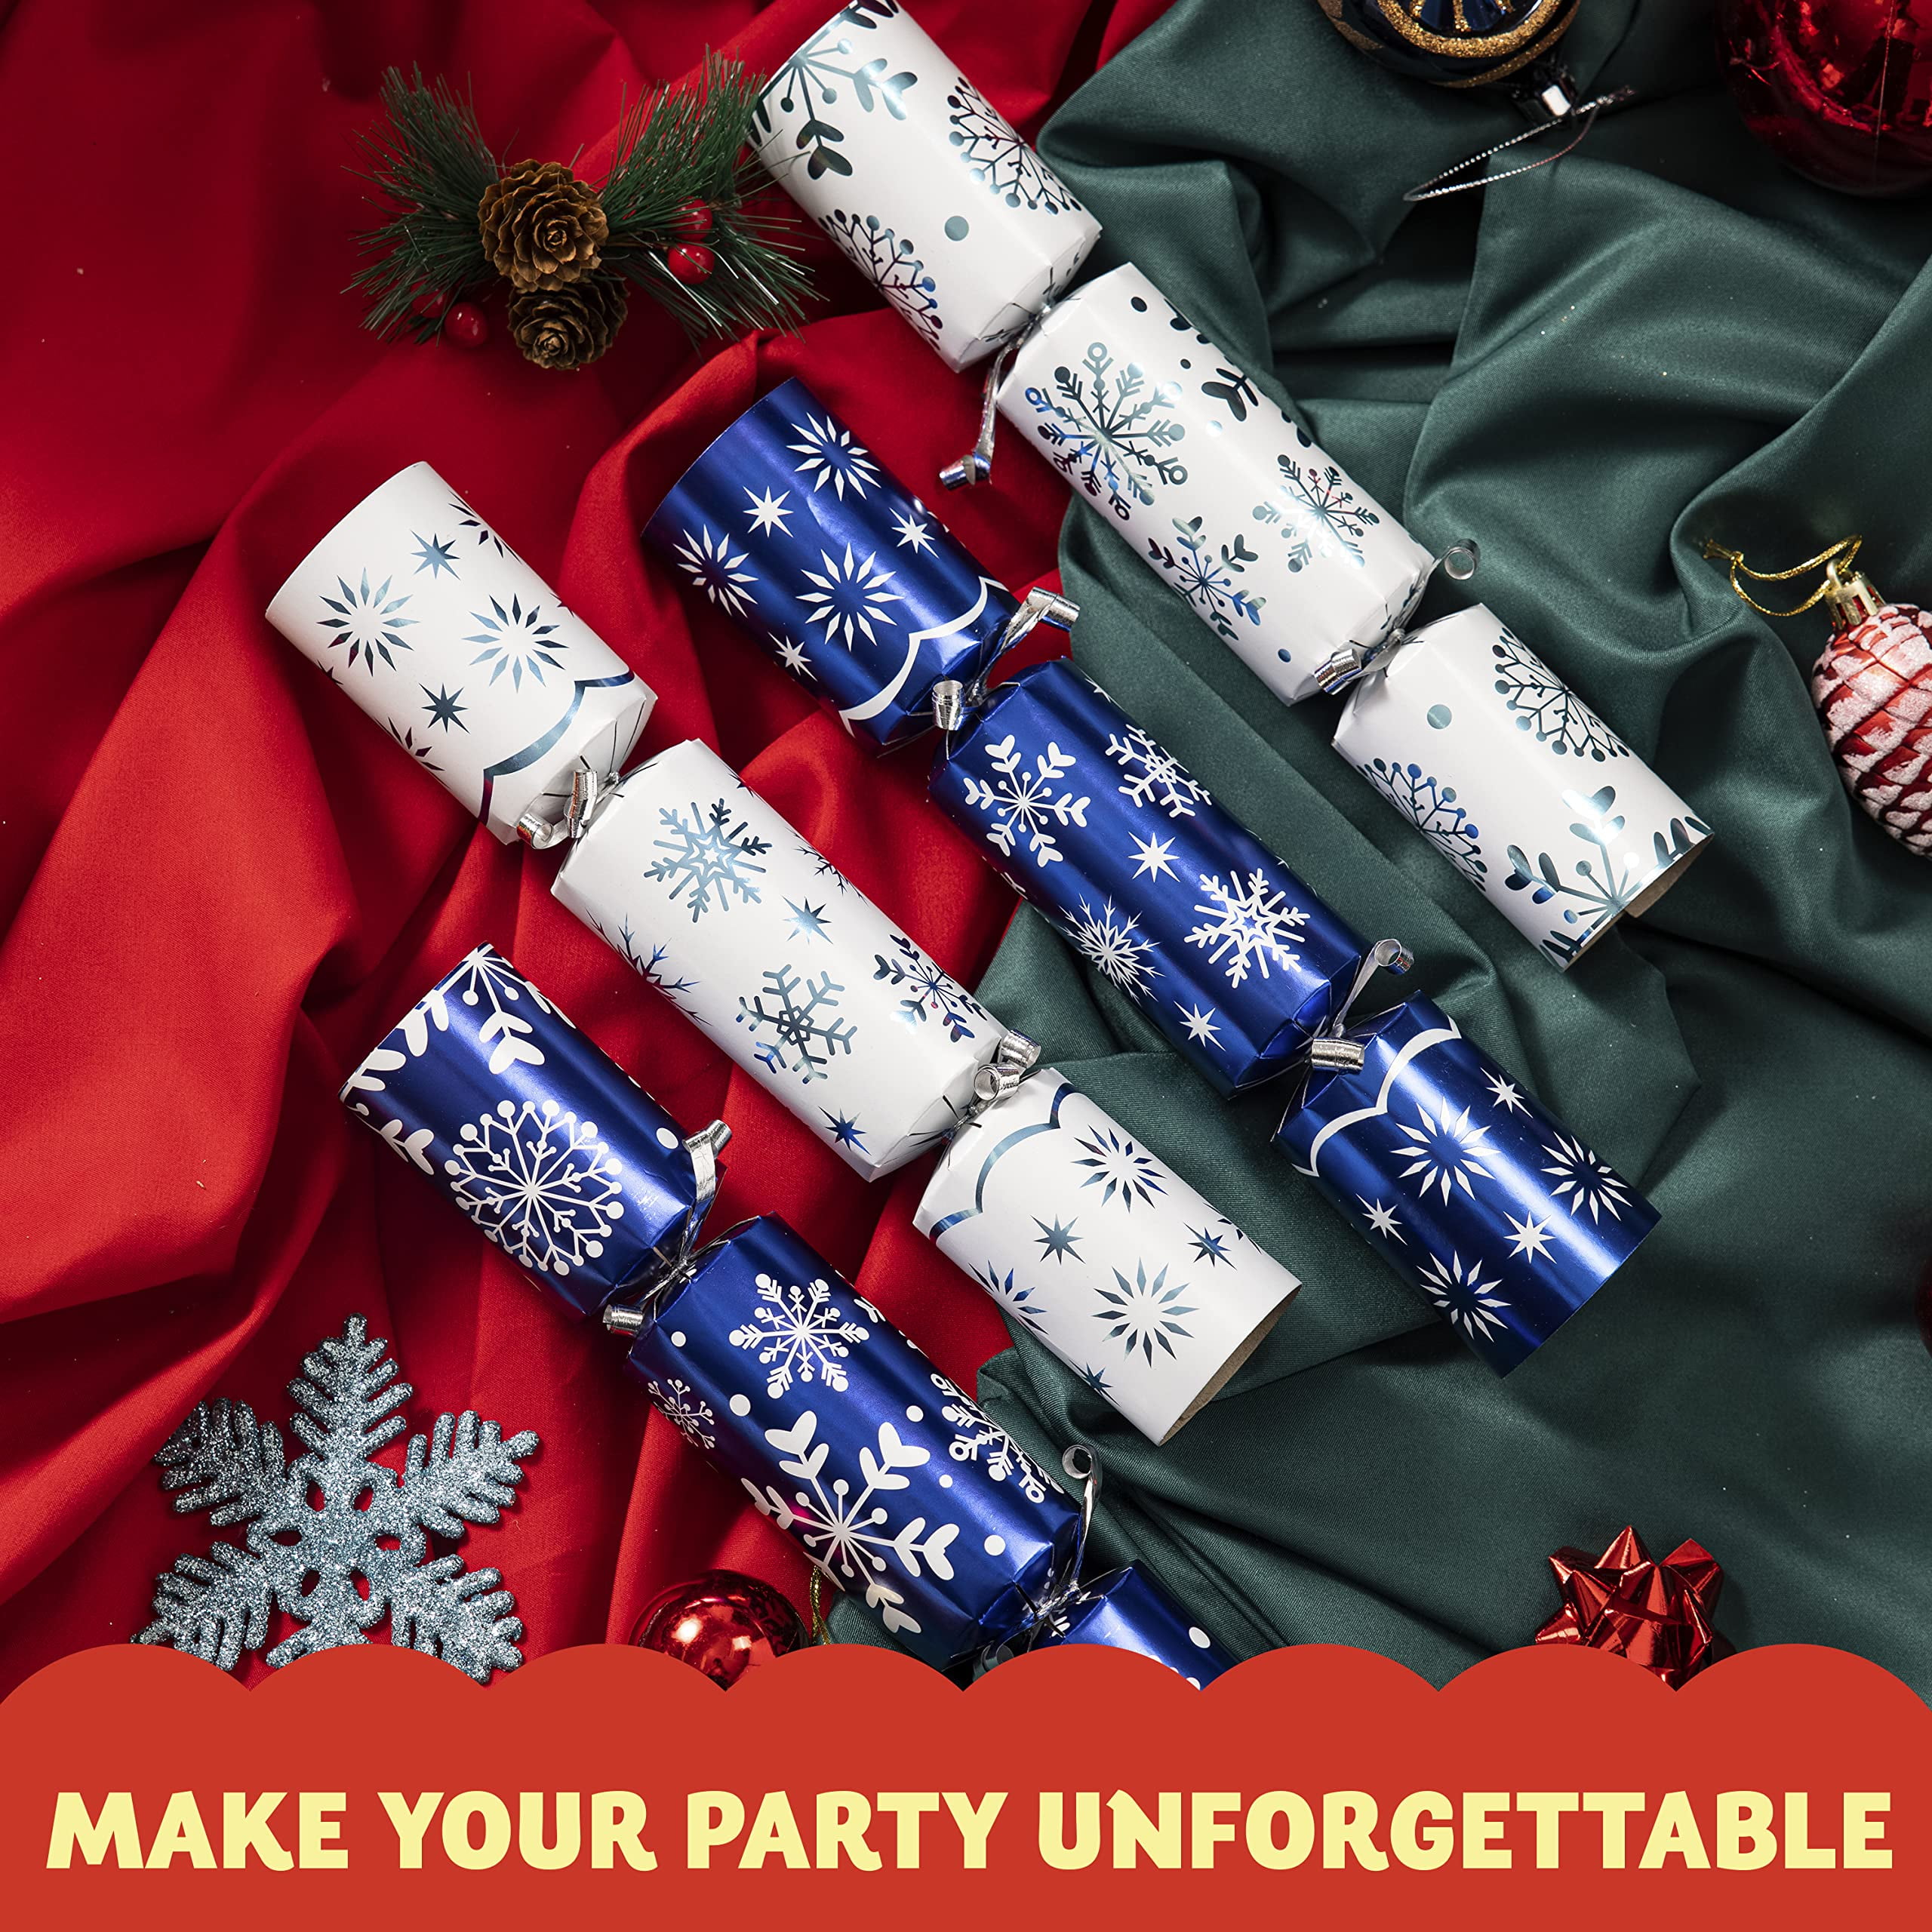 B-THERE 12 Inch Christmas Crackers Luxery Set with Novelty Toy, Paper Hat,  & Joke - Set of 8 Crackers (Red, White, Green Traditional)